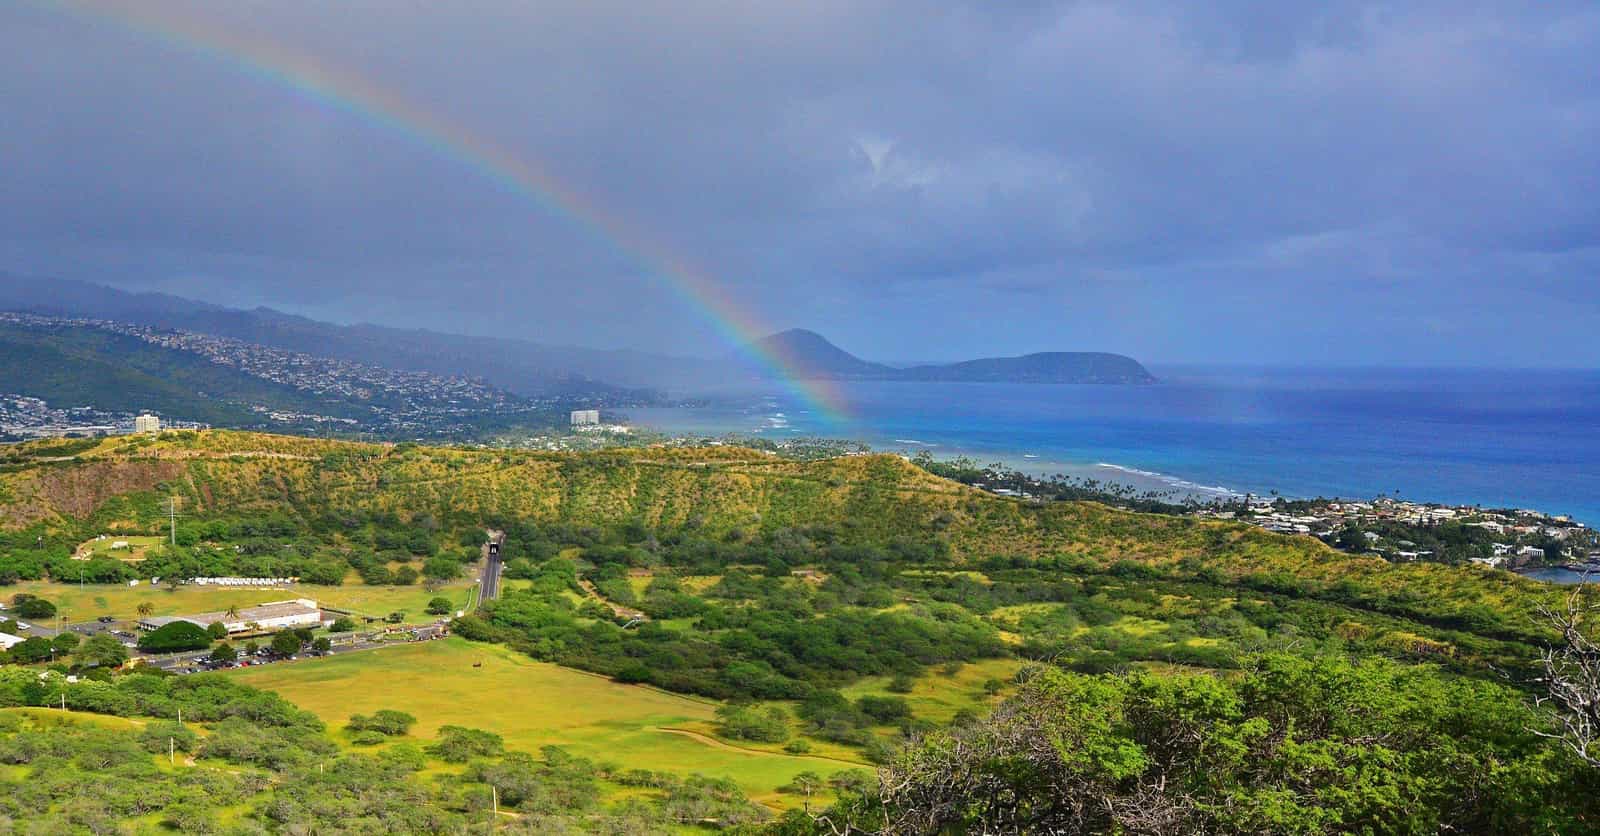 15 Of The Best Kept Secrets In Hawaii (According To Locals)